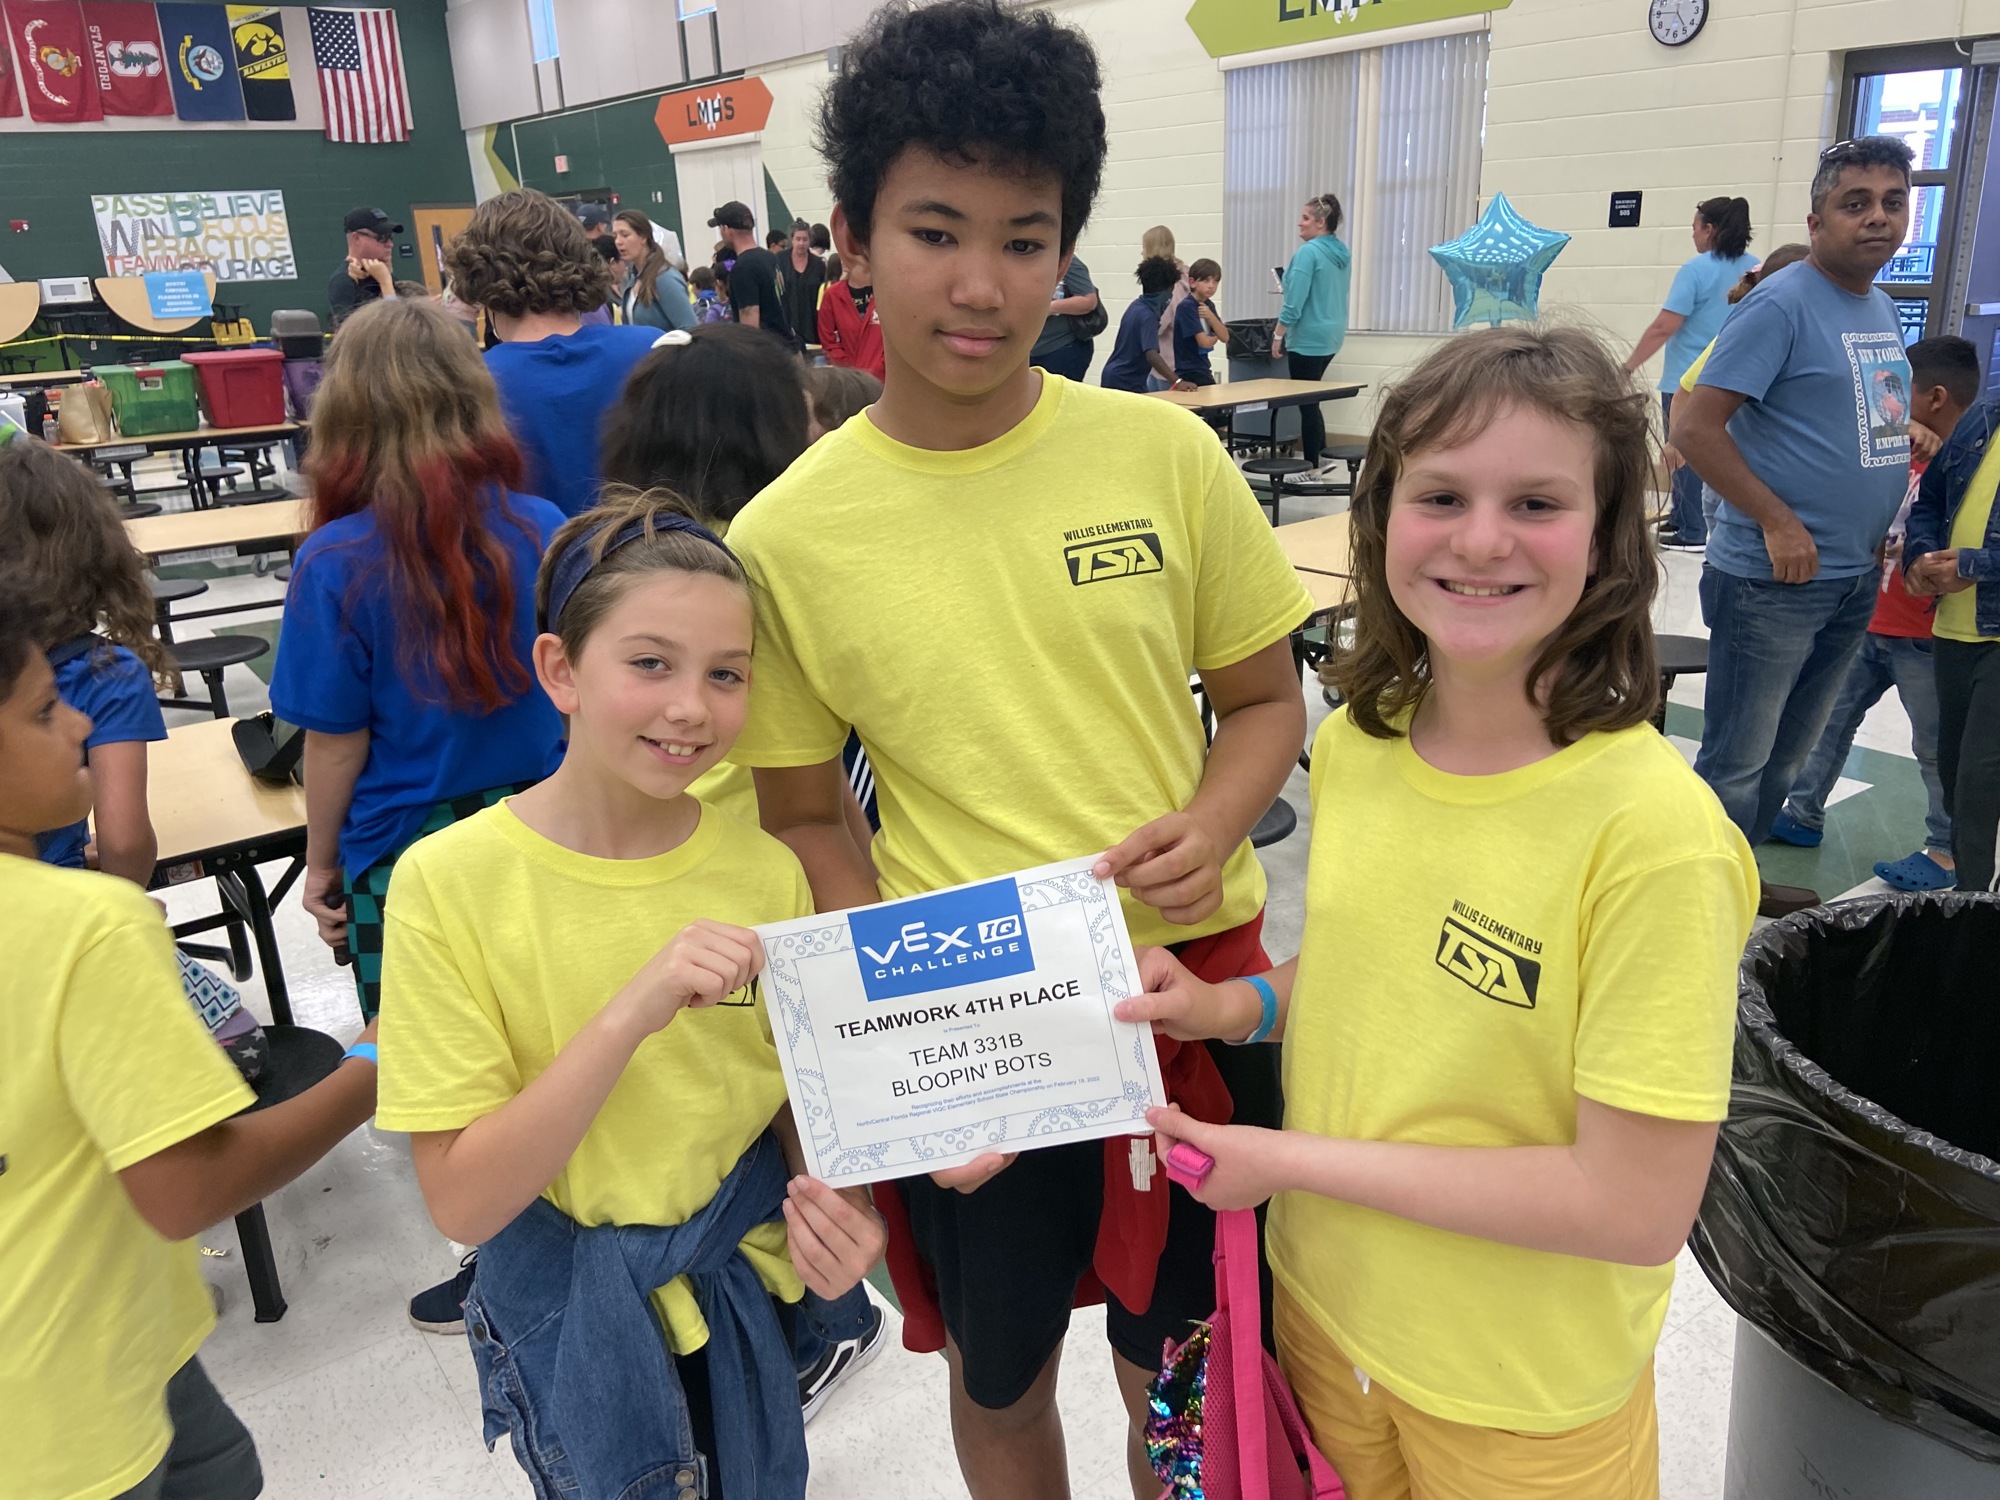 Fifth graders Danica Hall, Noah Johnson and Alisa Sabodash celebrate winning fourth place at the VEX Robotics Regional Competition. (Courtesy photo)